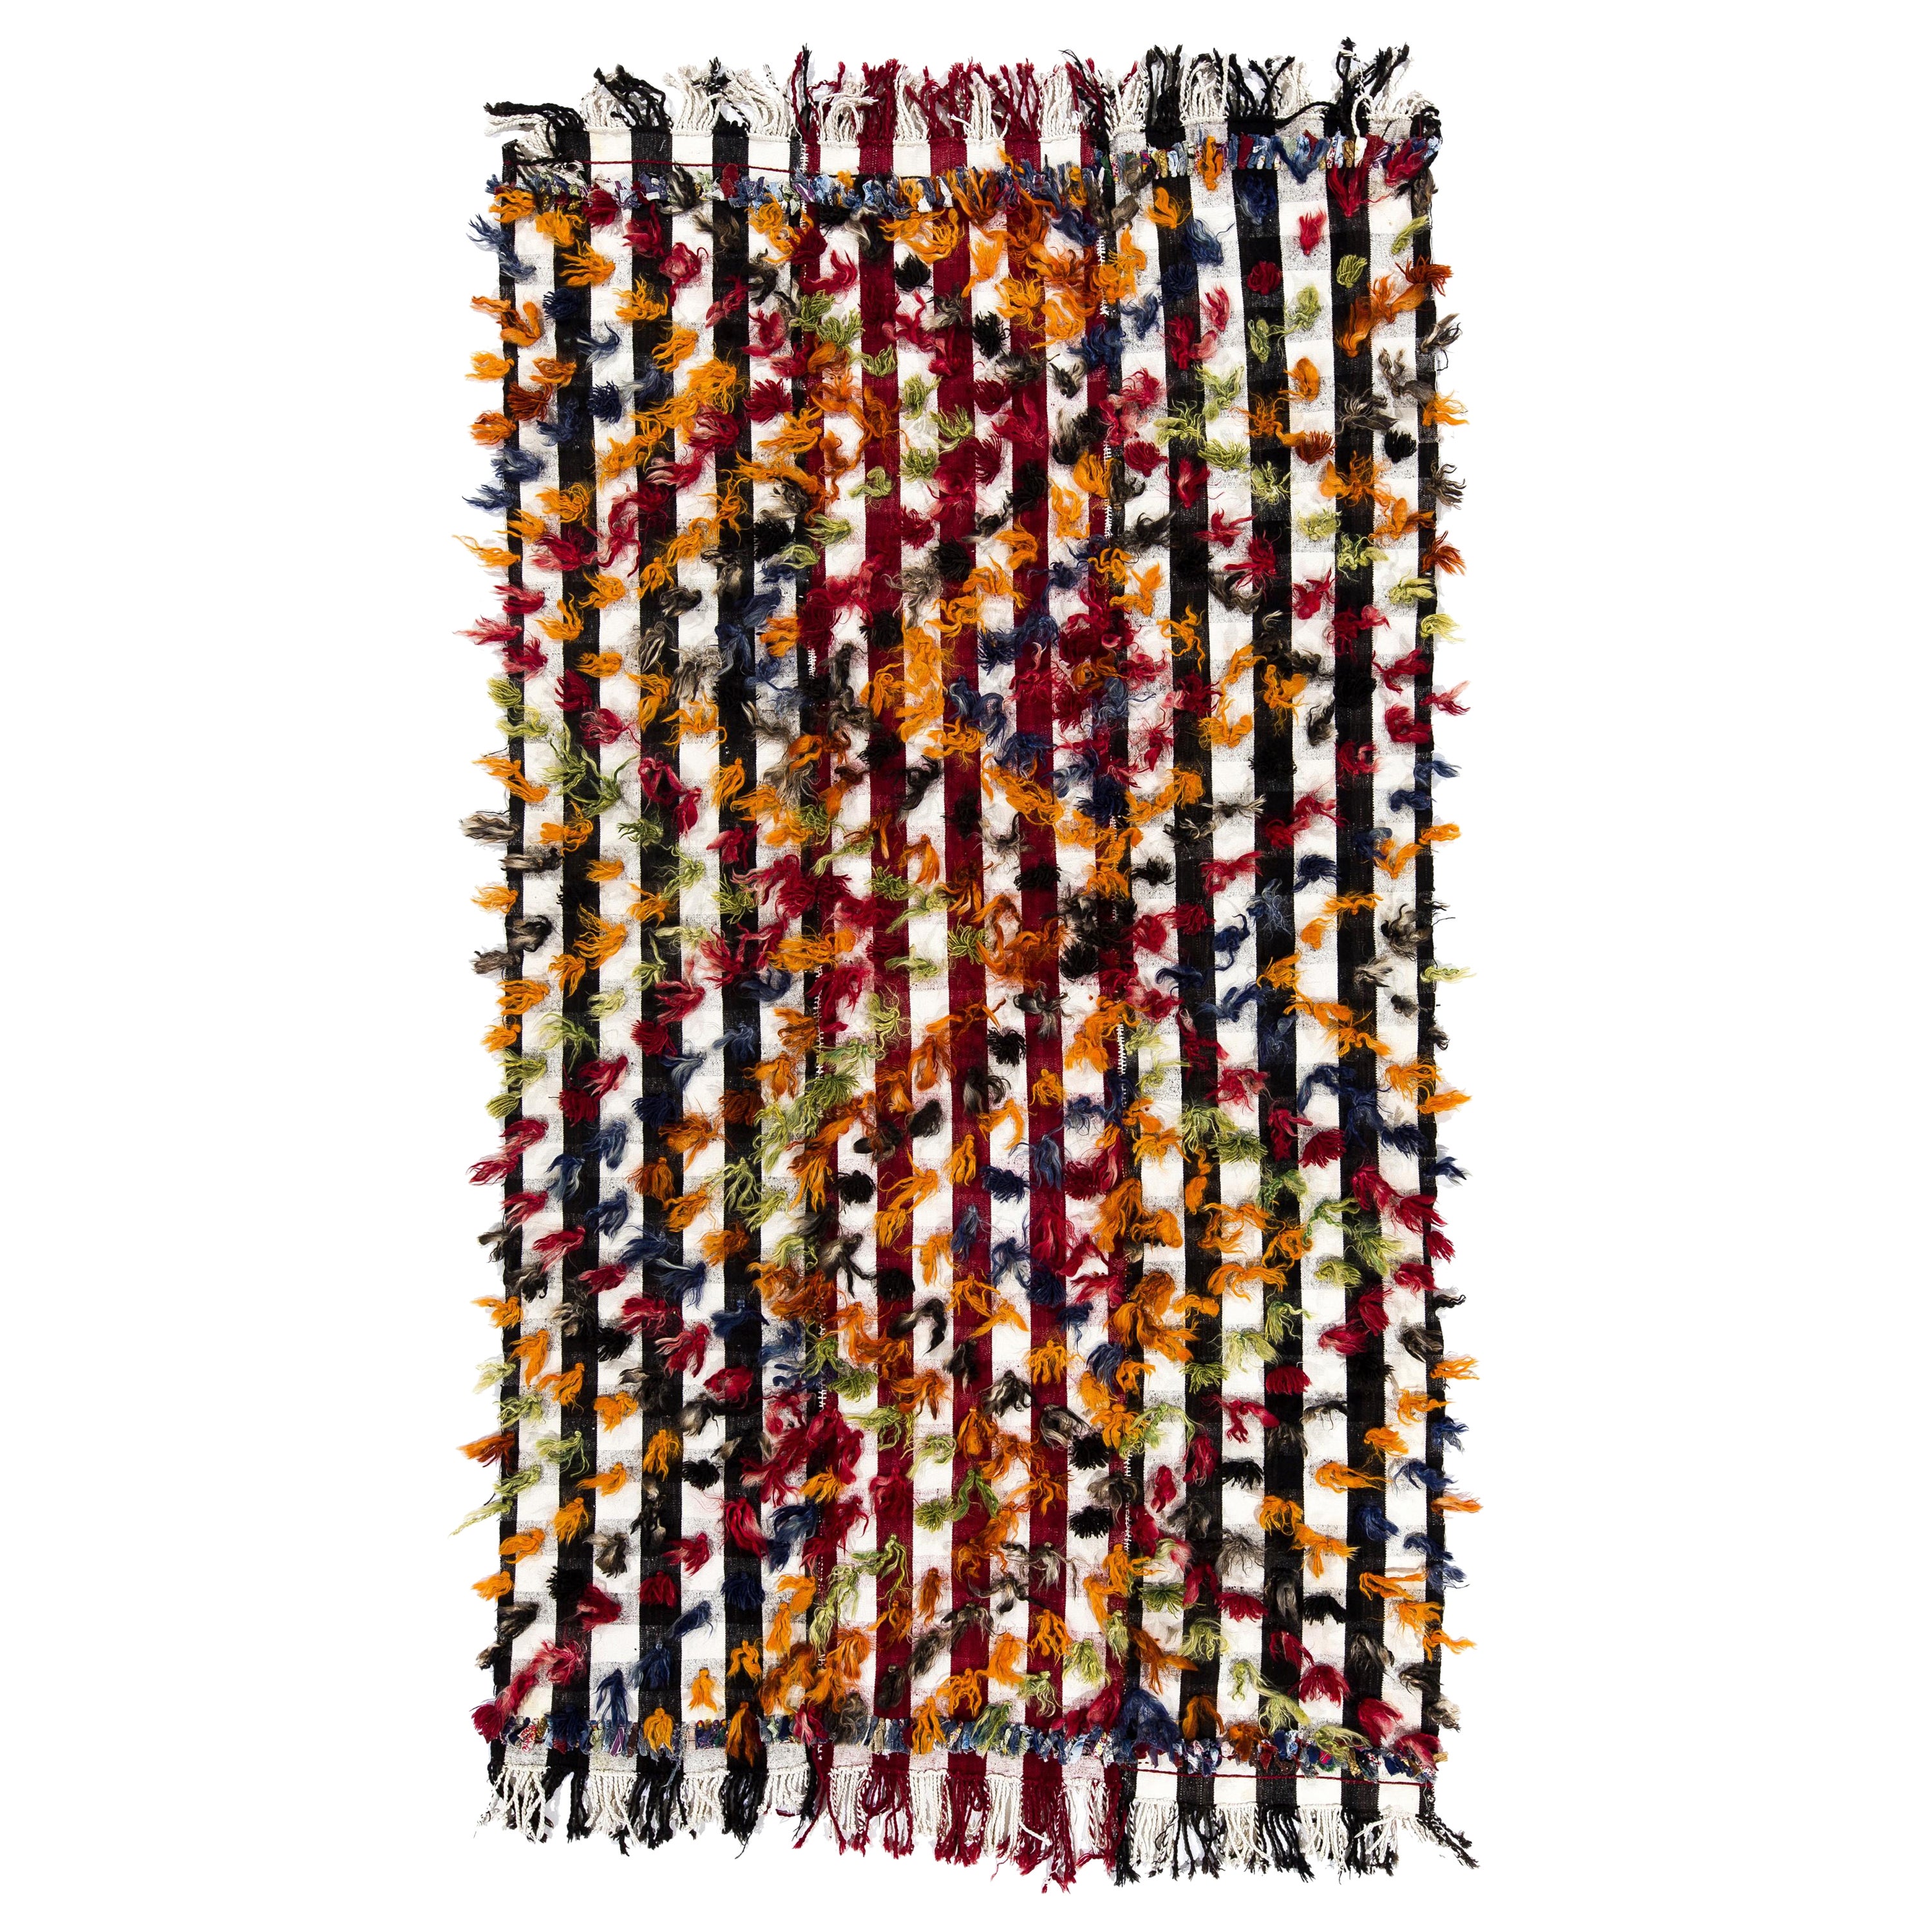 4.8x9 ft Banded Tribal Kilim Rug with Colorful Poms. Bed Cover, Wall Hanging For Sale